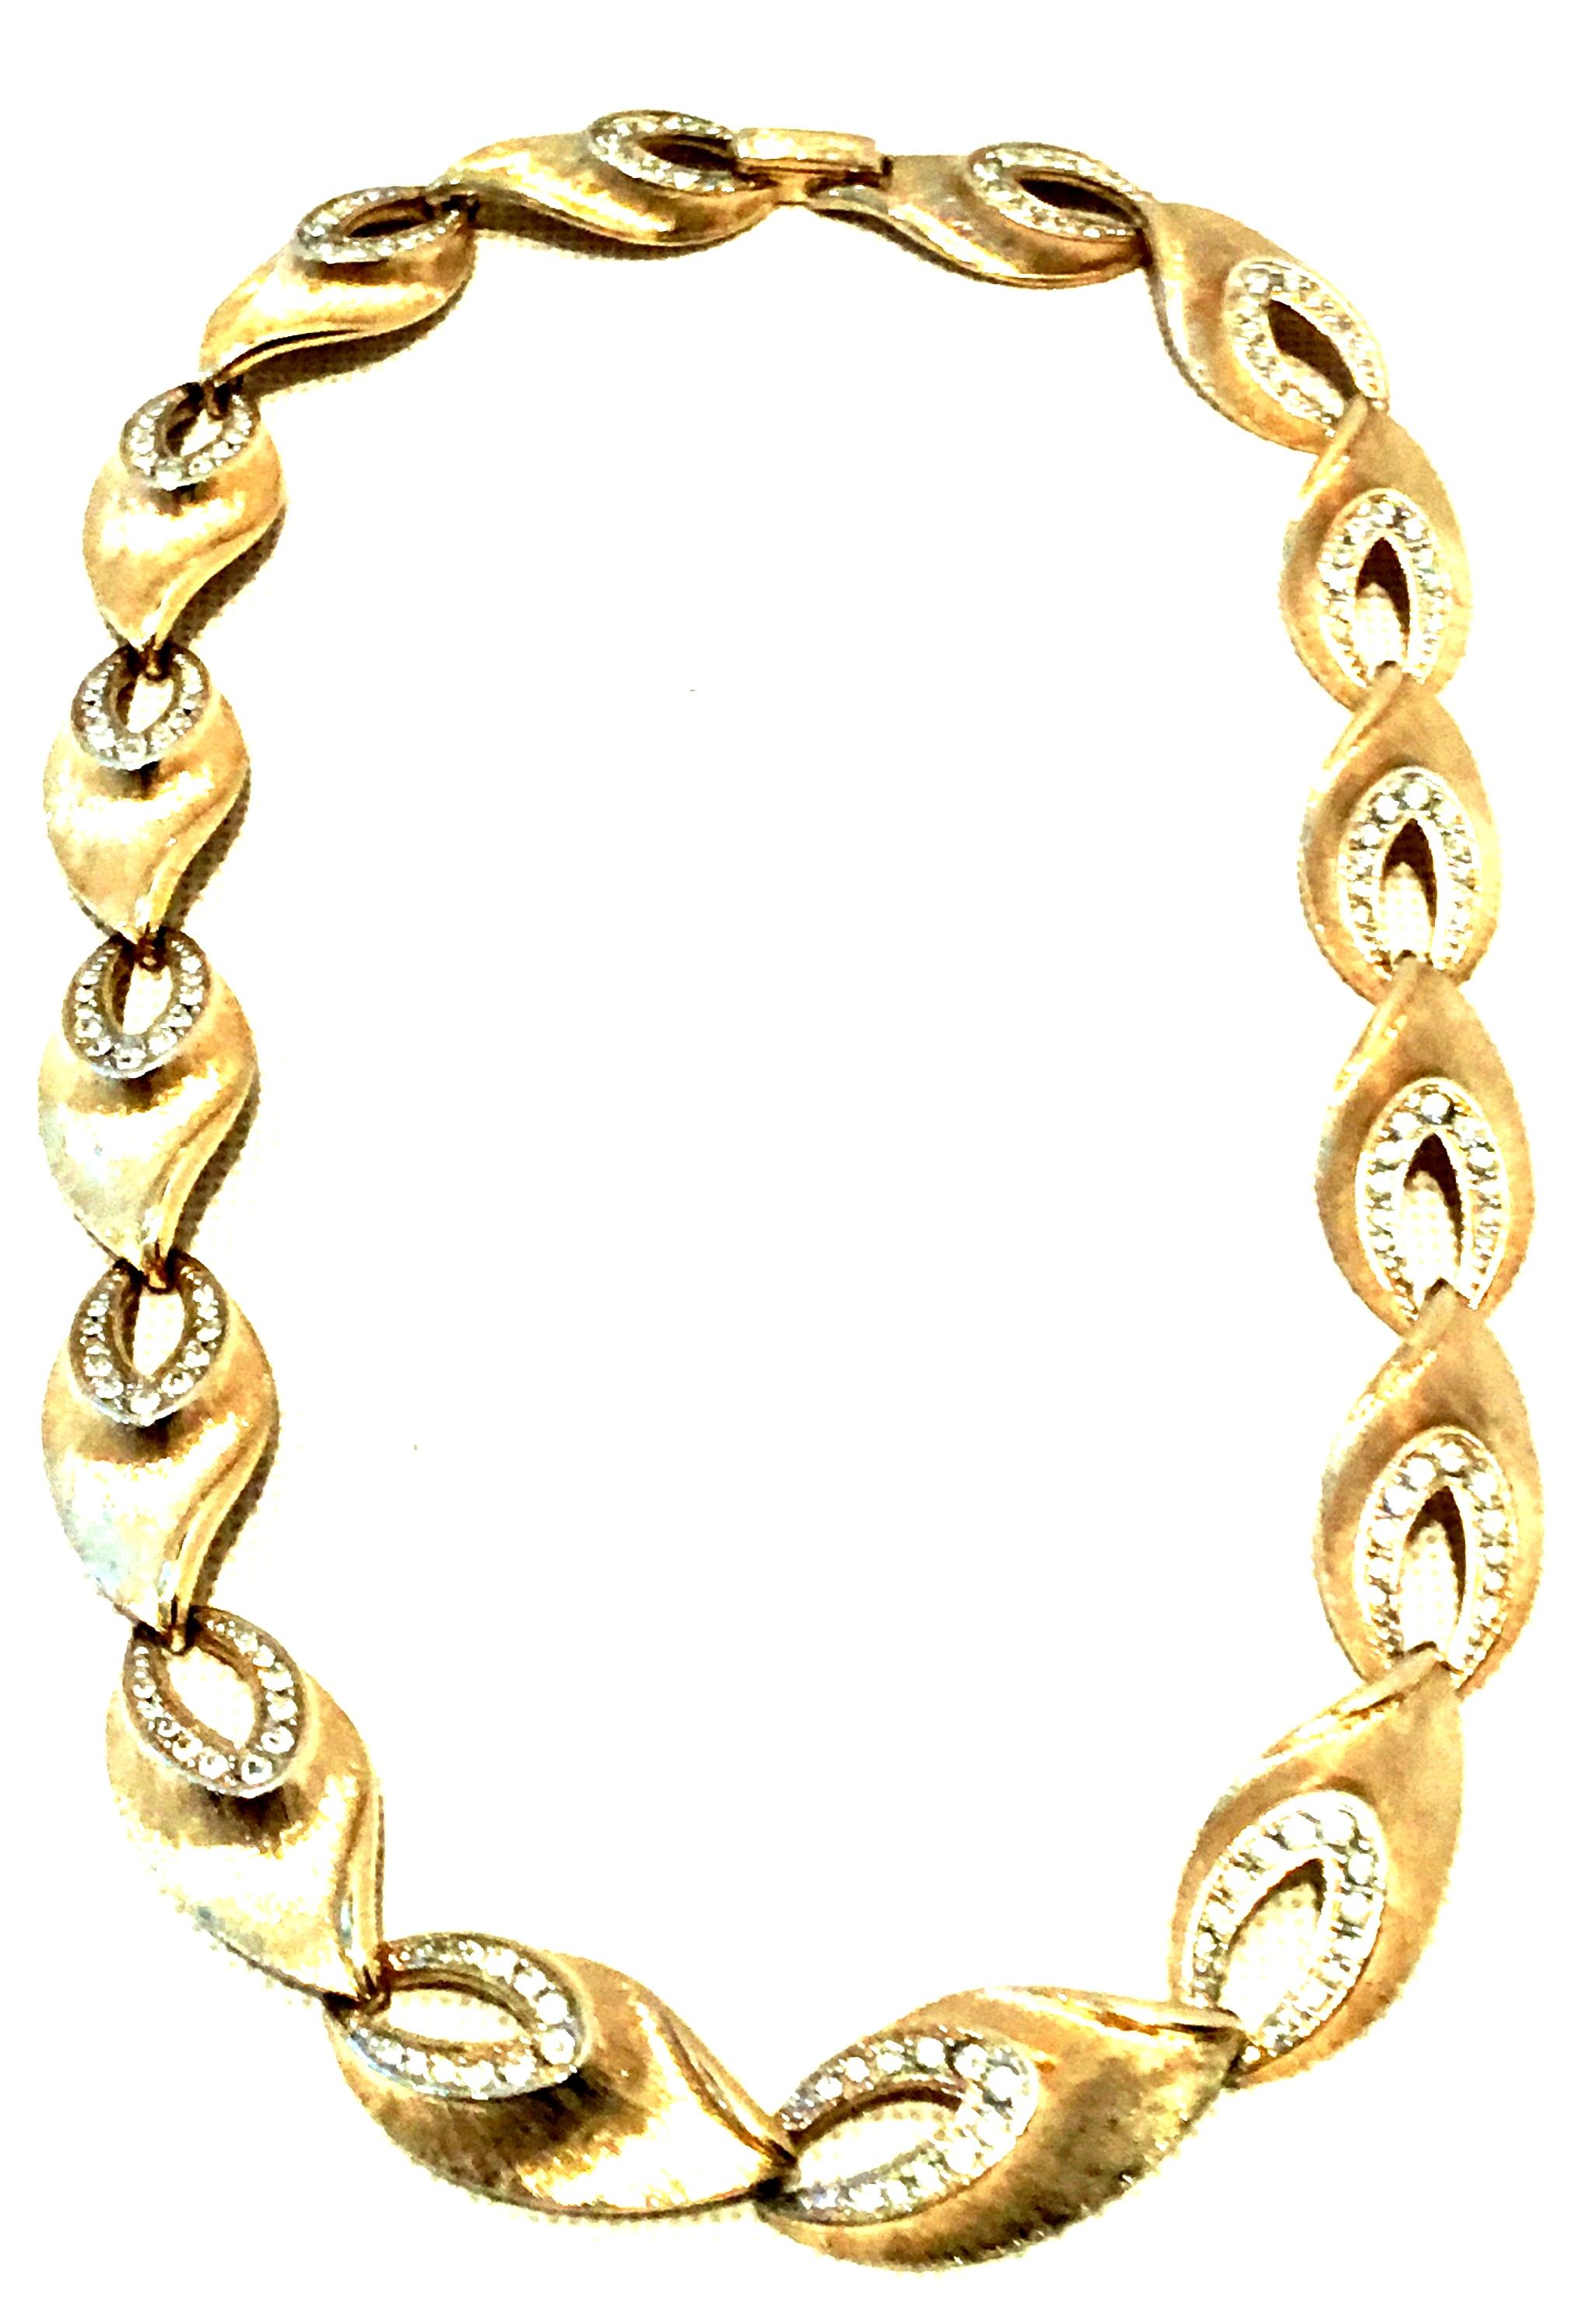 20th Century Gold Plate & Austrian Crystal Link Choker Style Necklace By, Kramer. This finely crafted brushed gold plate link choker style necklace features curved, dimensional links with brilliant cut and faceted colorless pave set Austrian crystal